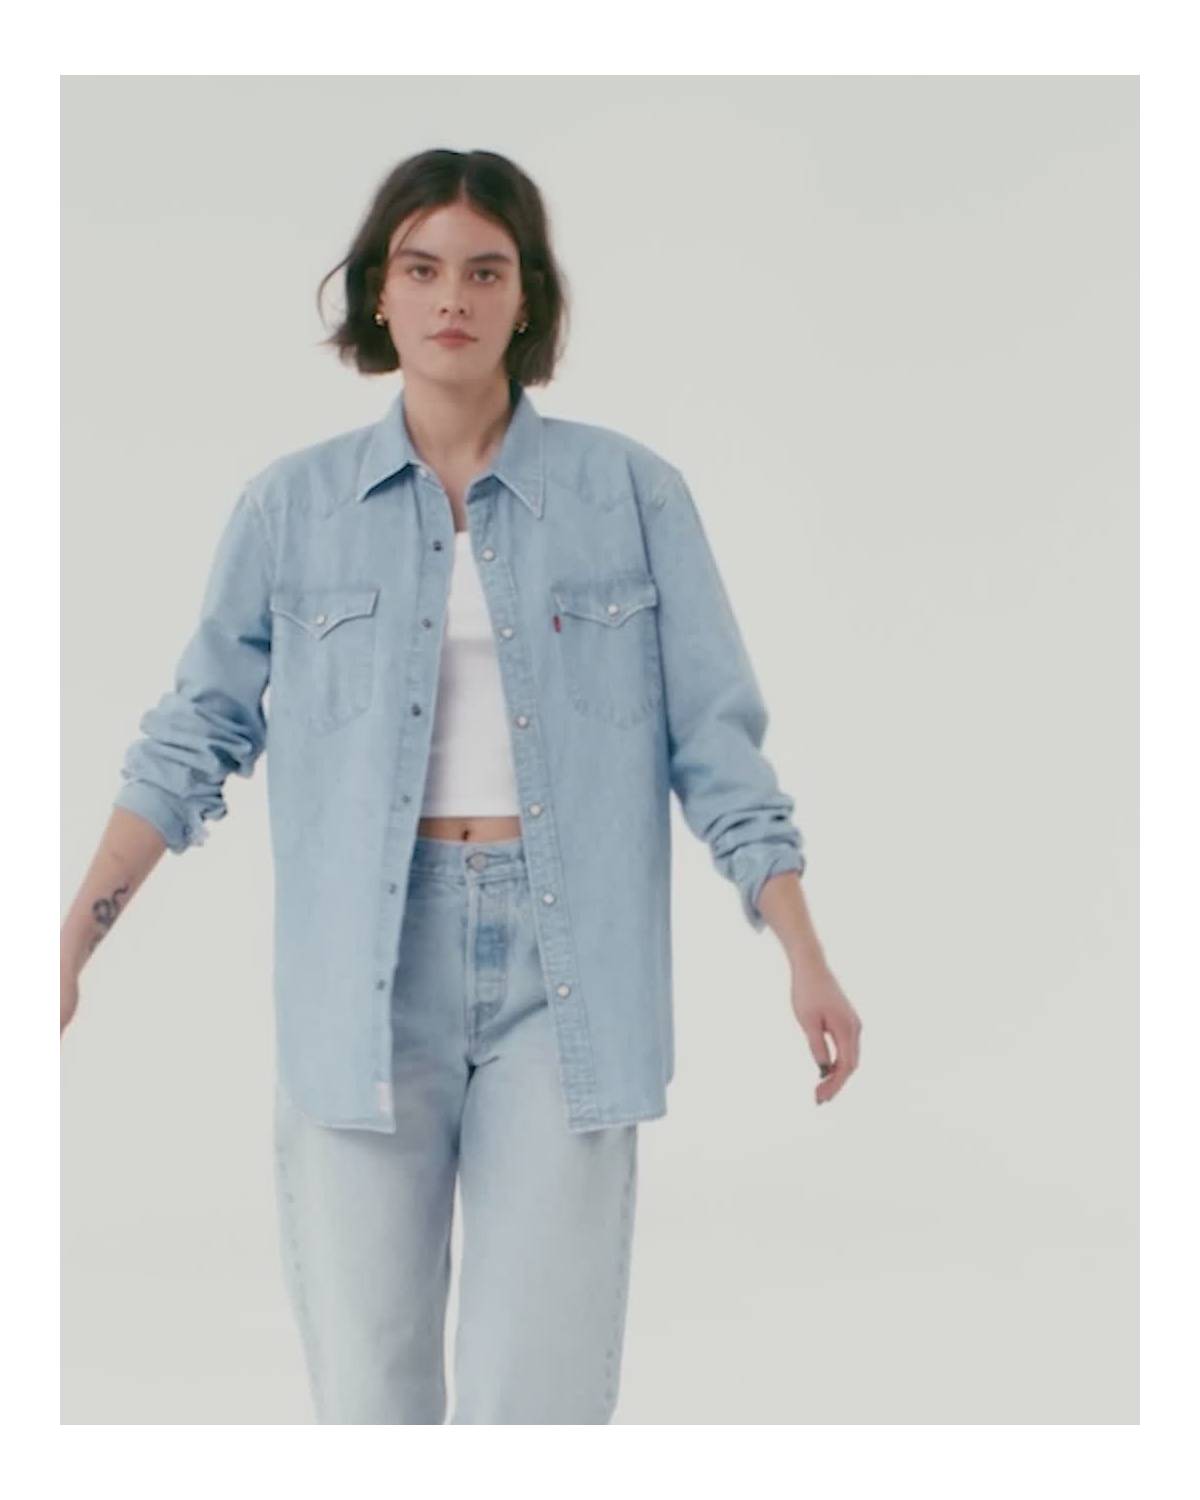 Video of model in women's light wash denim button down, light wash jeans and white tank